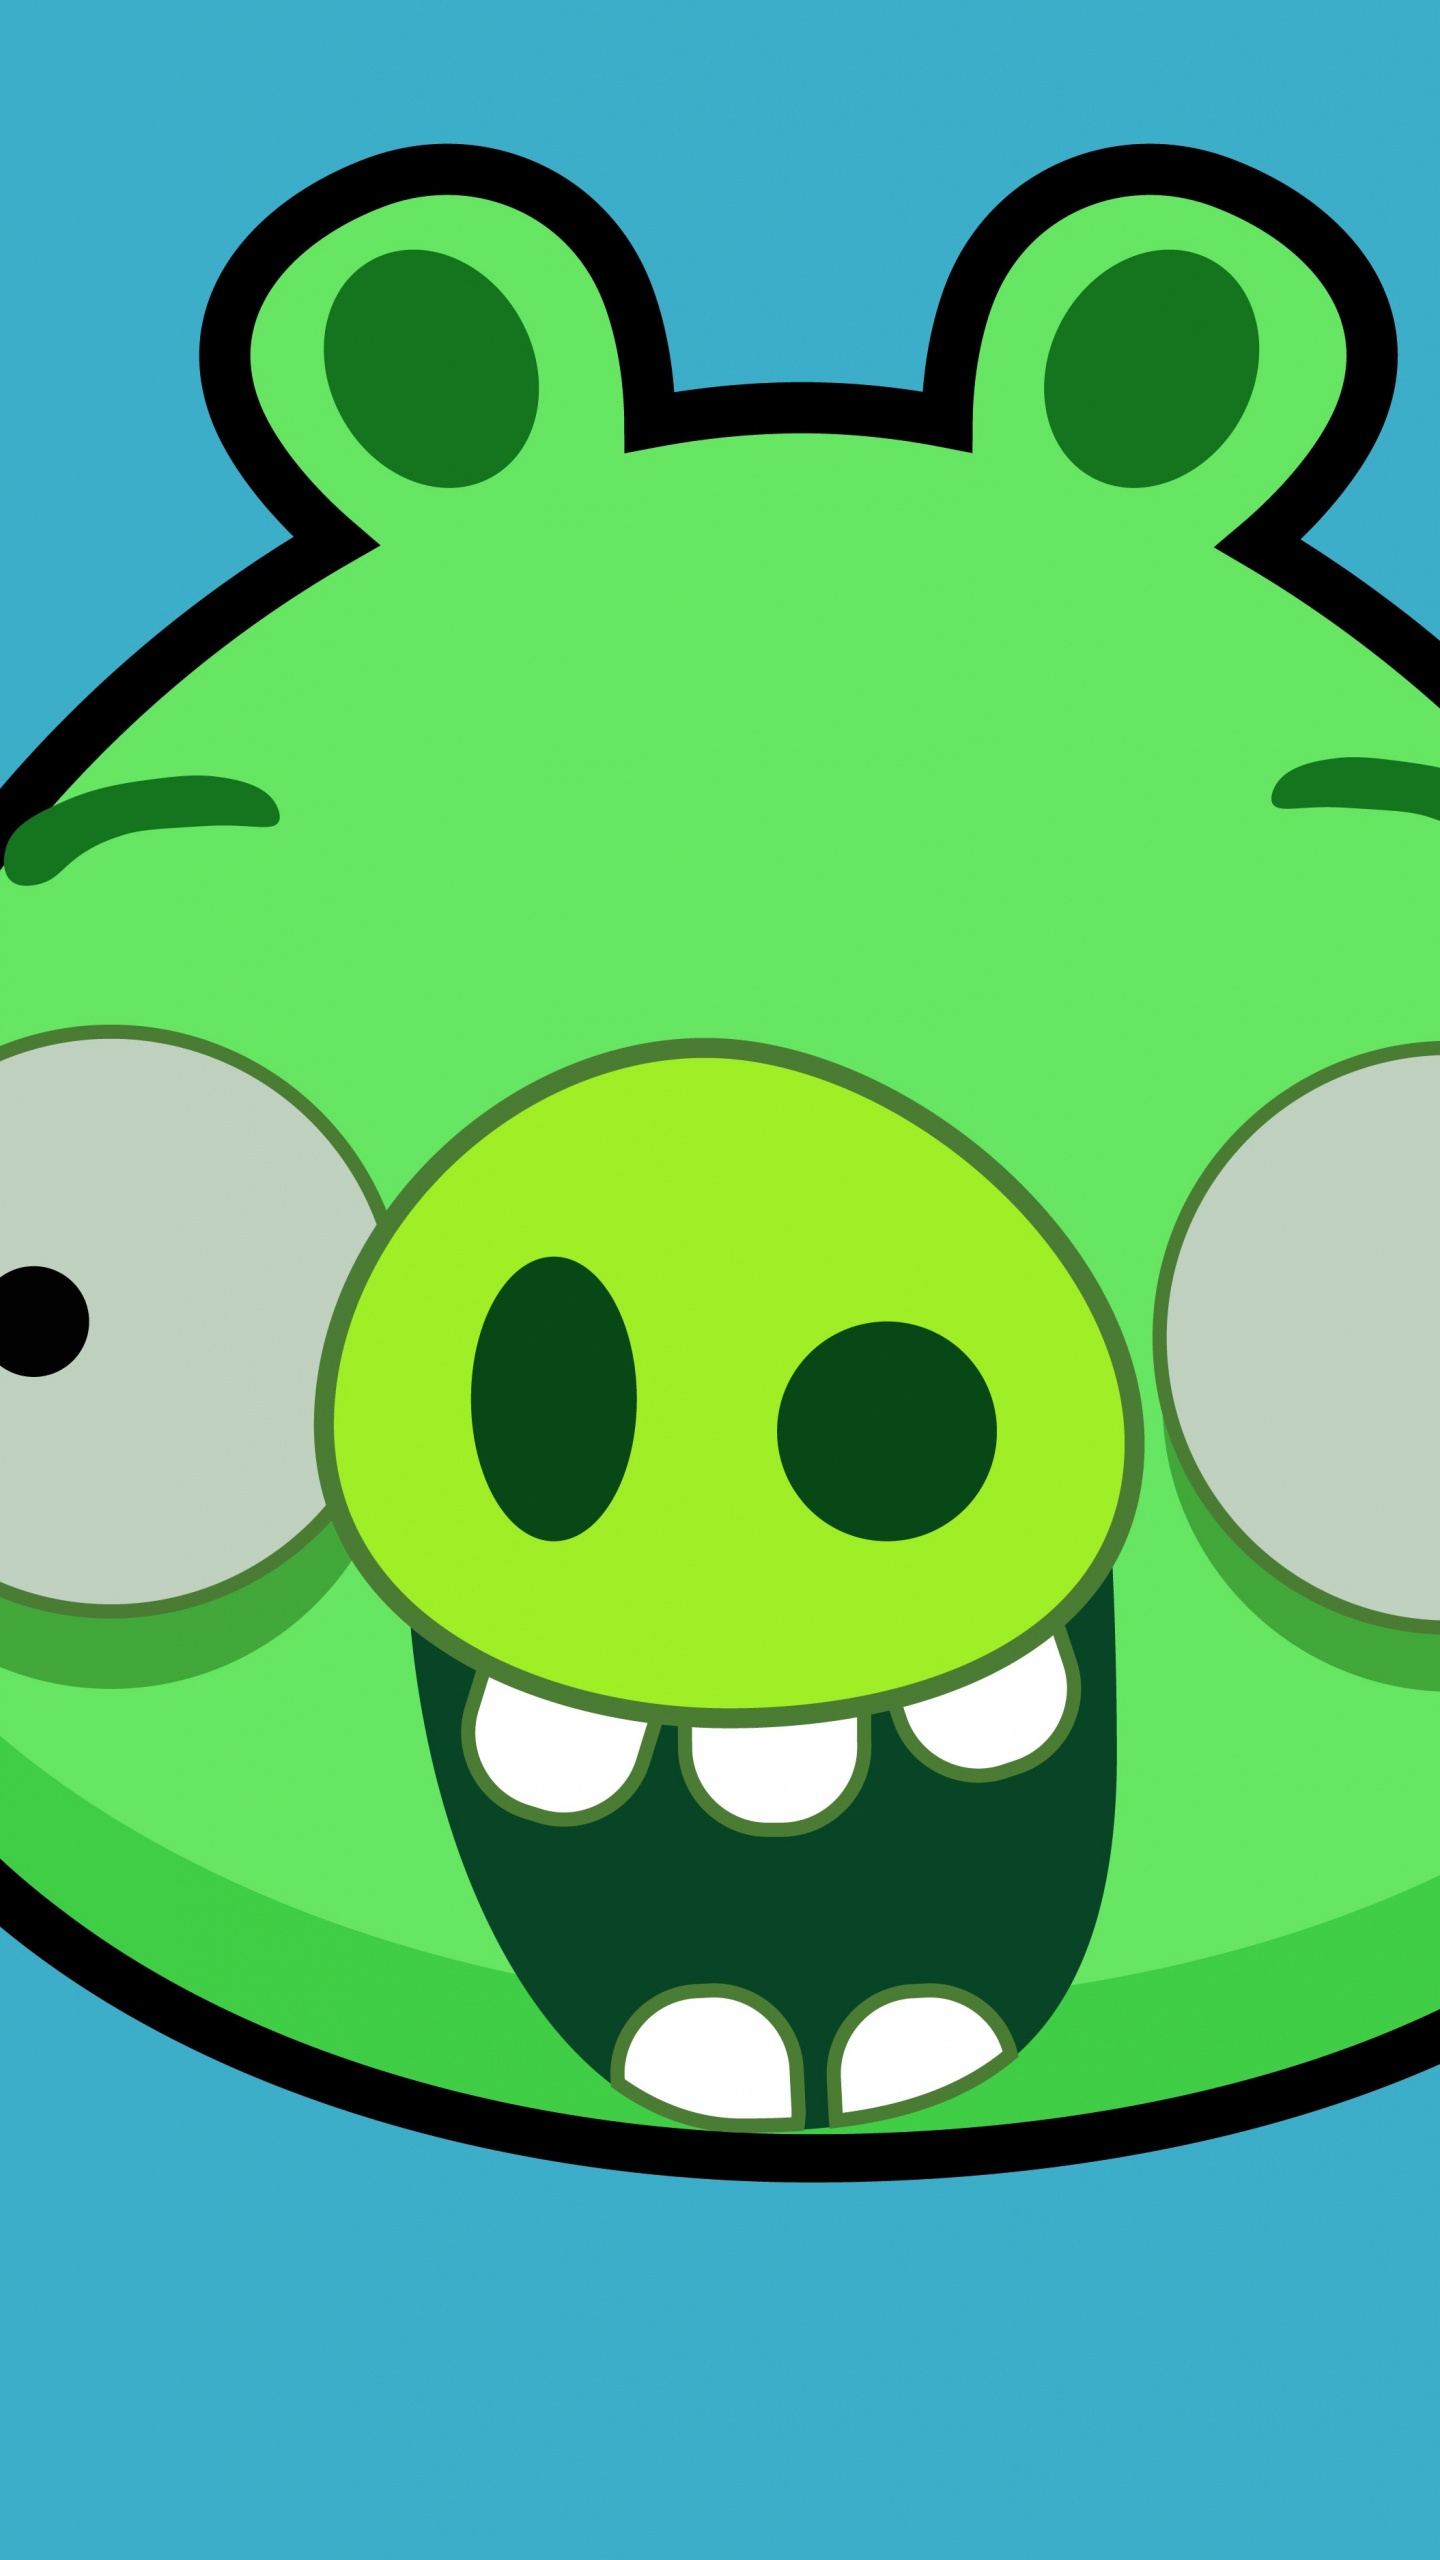 Angry Birds, Green, Cartoon, Smile, Illustration. Wallpaper in 1440x2560 Resolution